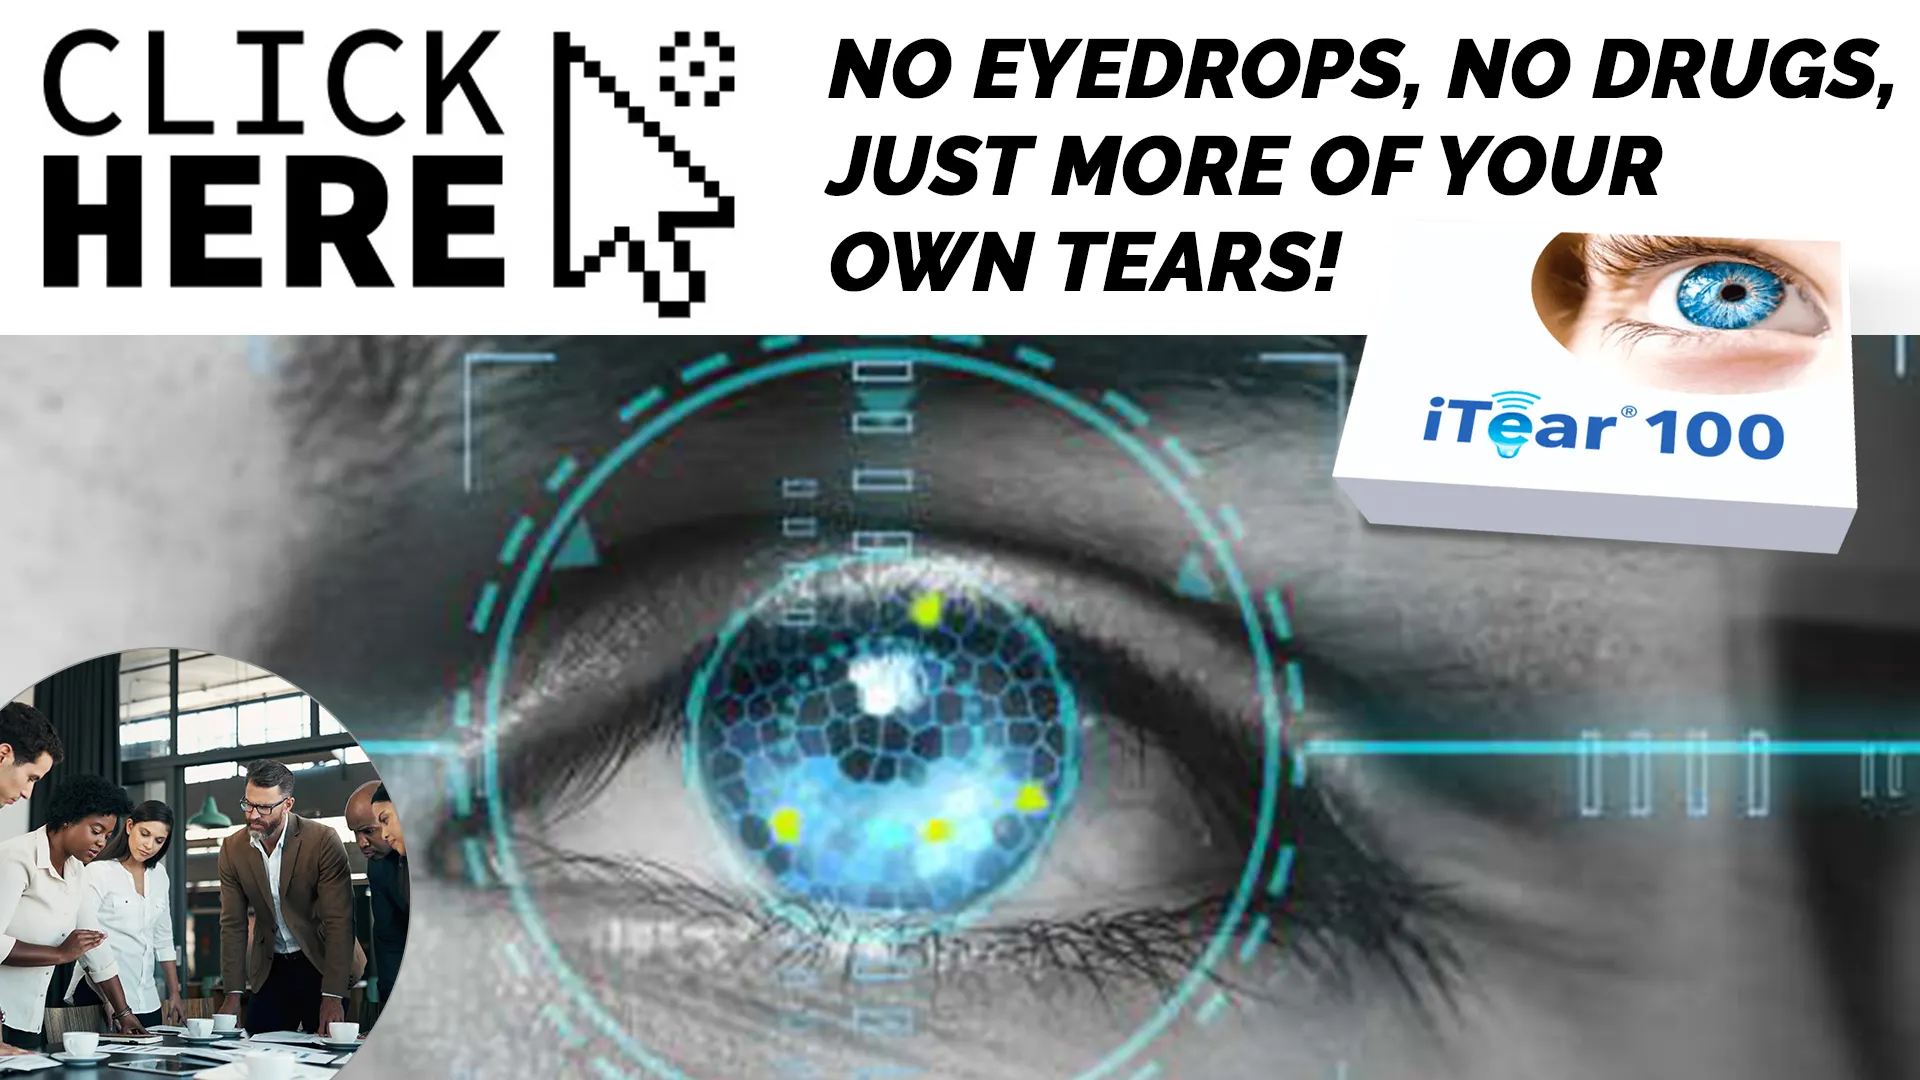 The iTEAR100 Approach to Dry Eye Relief